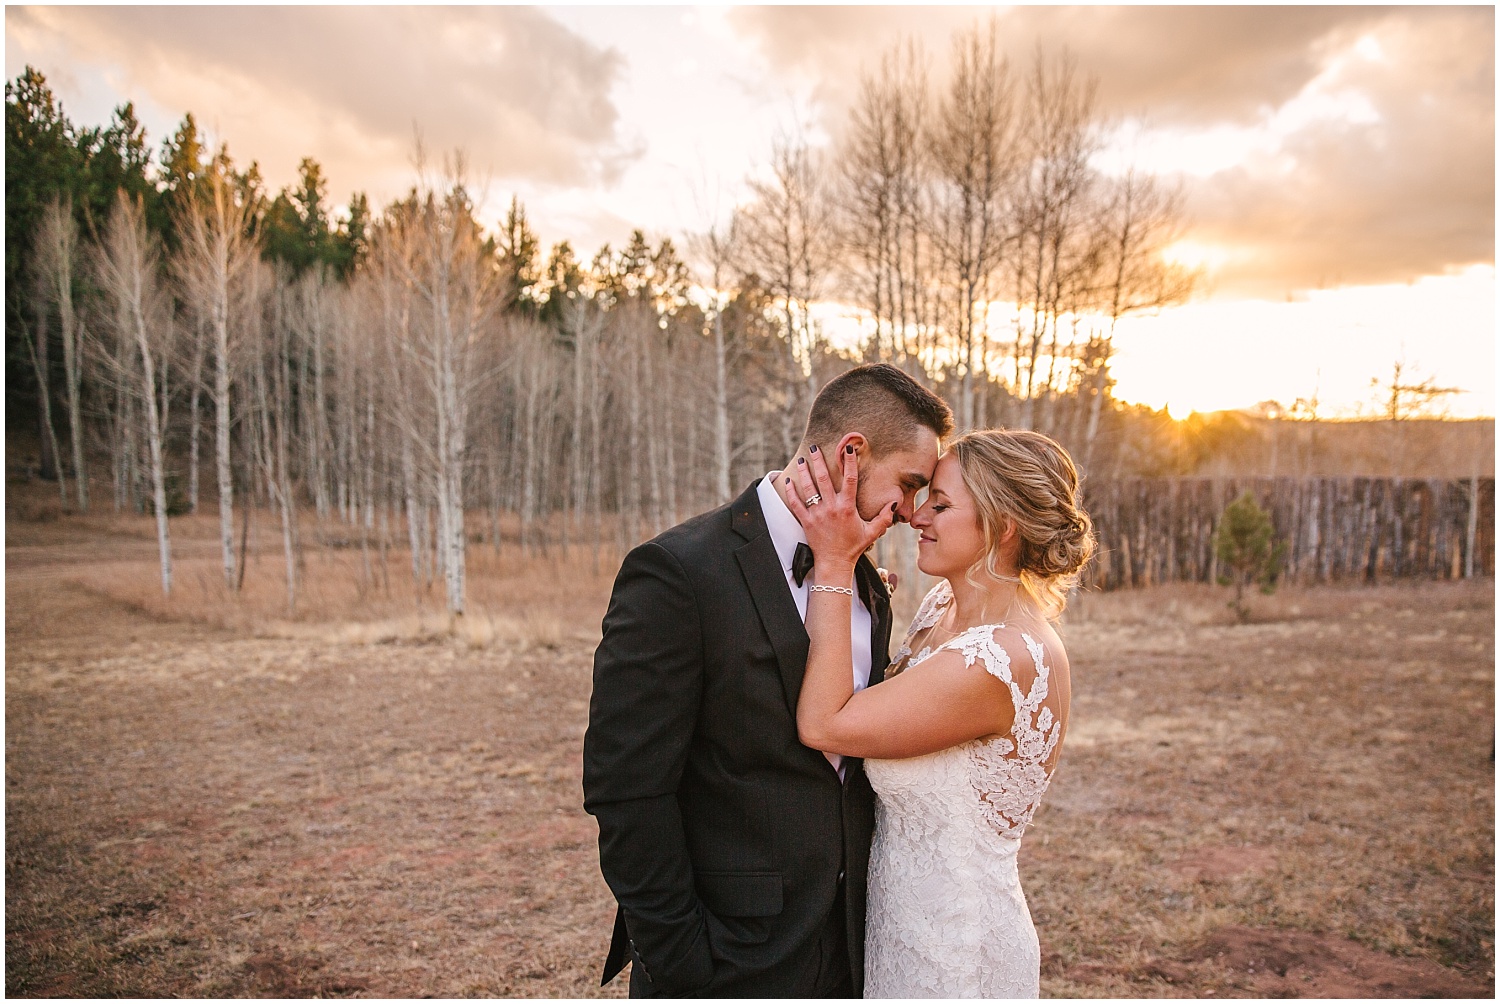 Bride and groom at sunset in Woodland Park Colorado